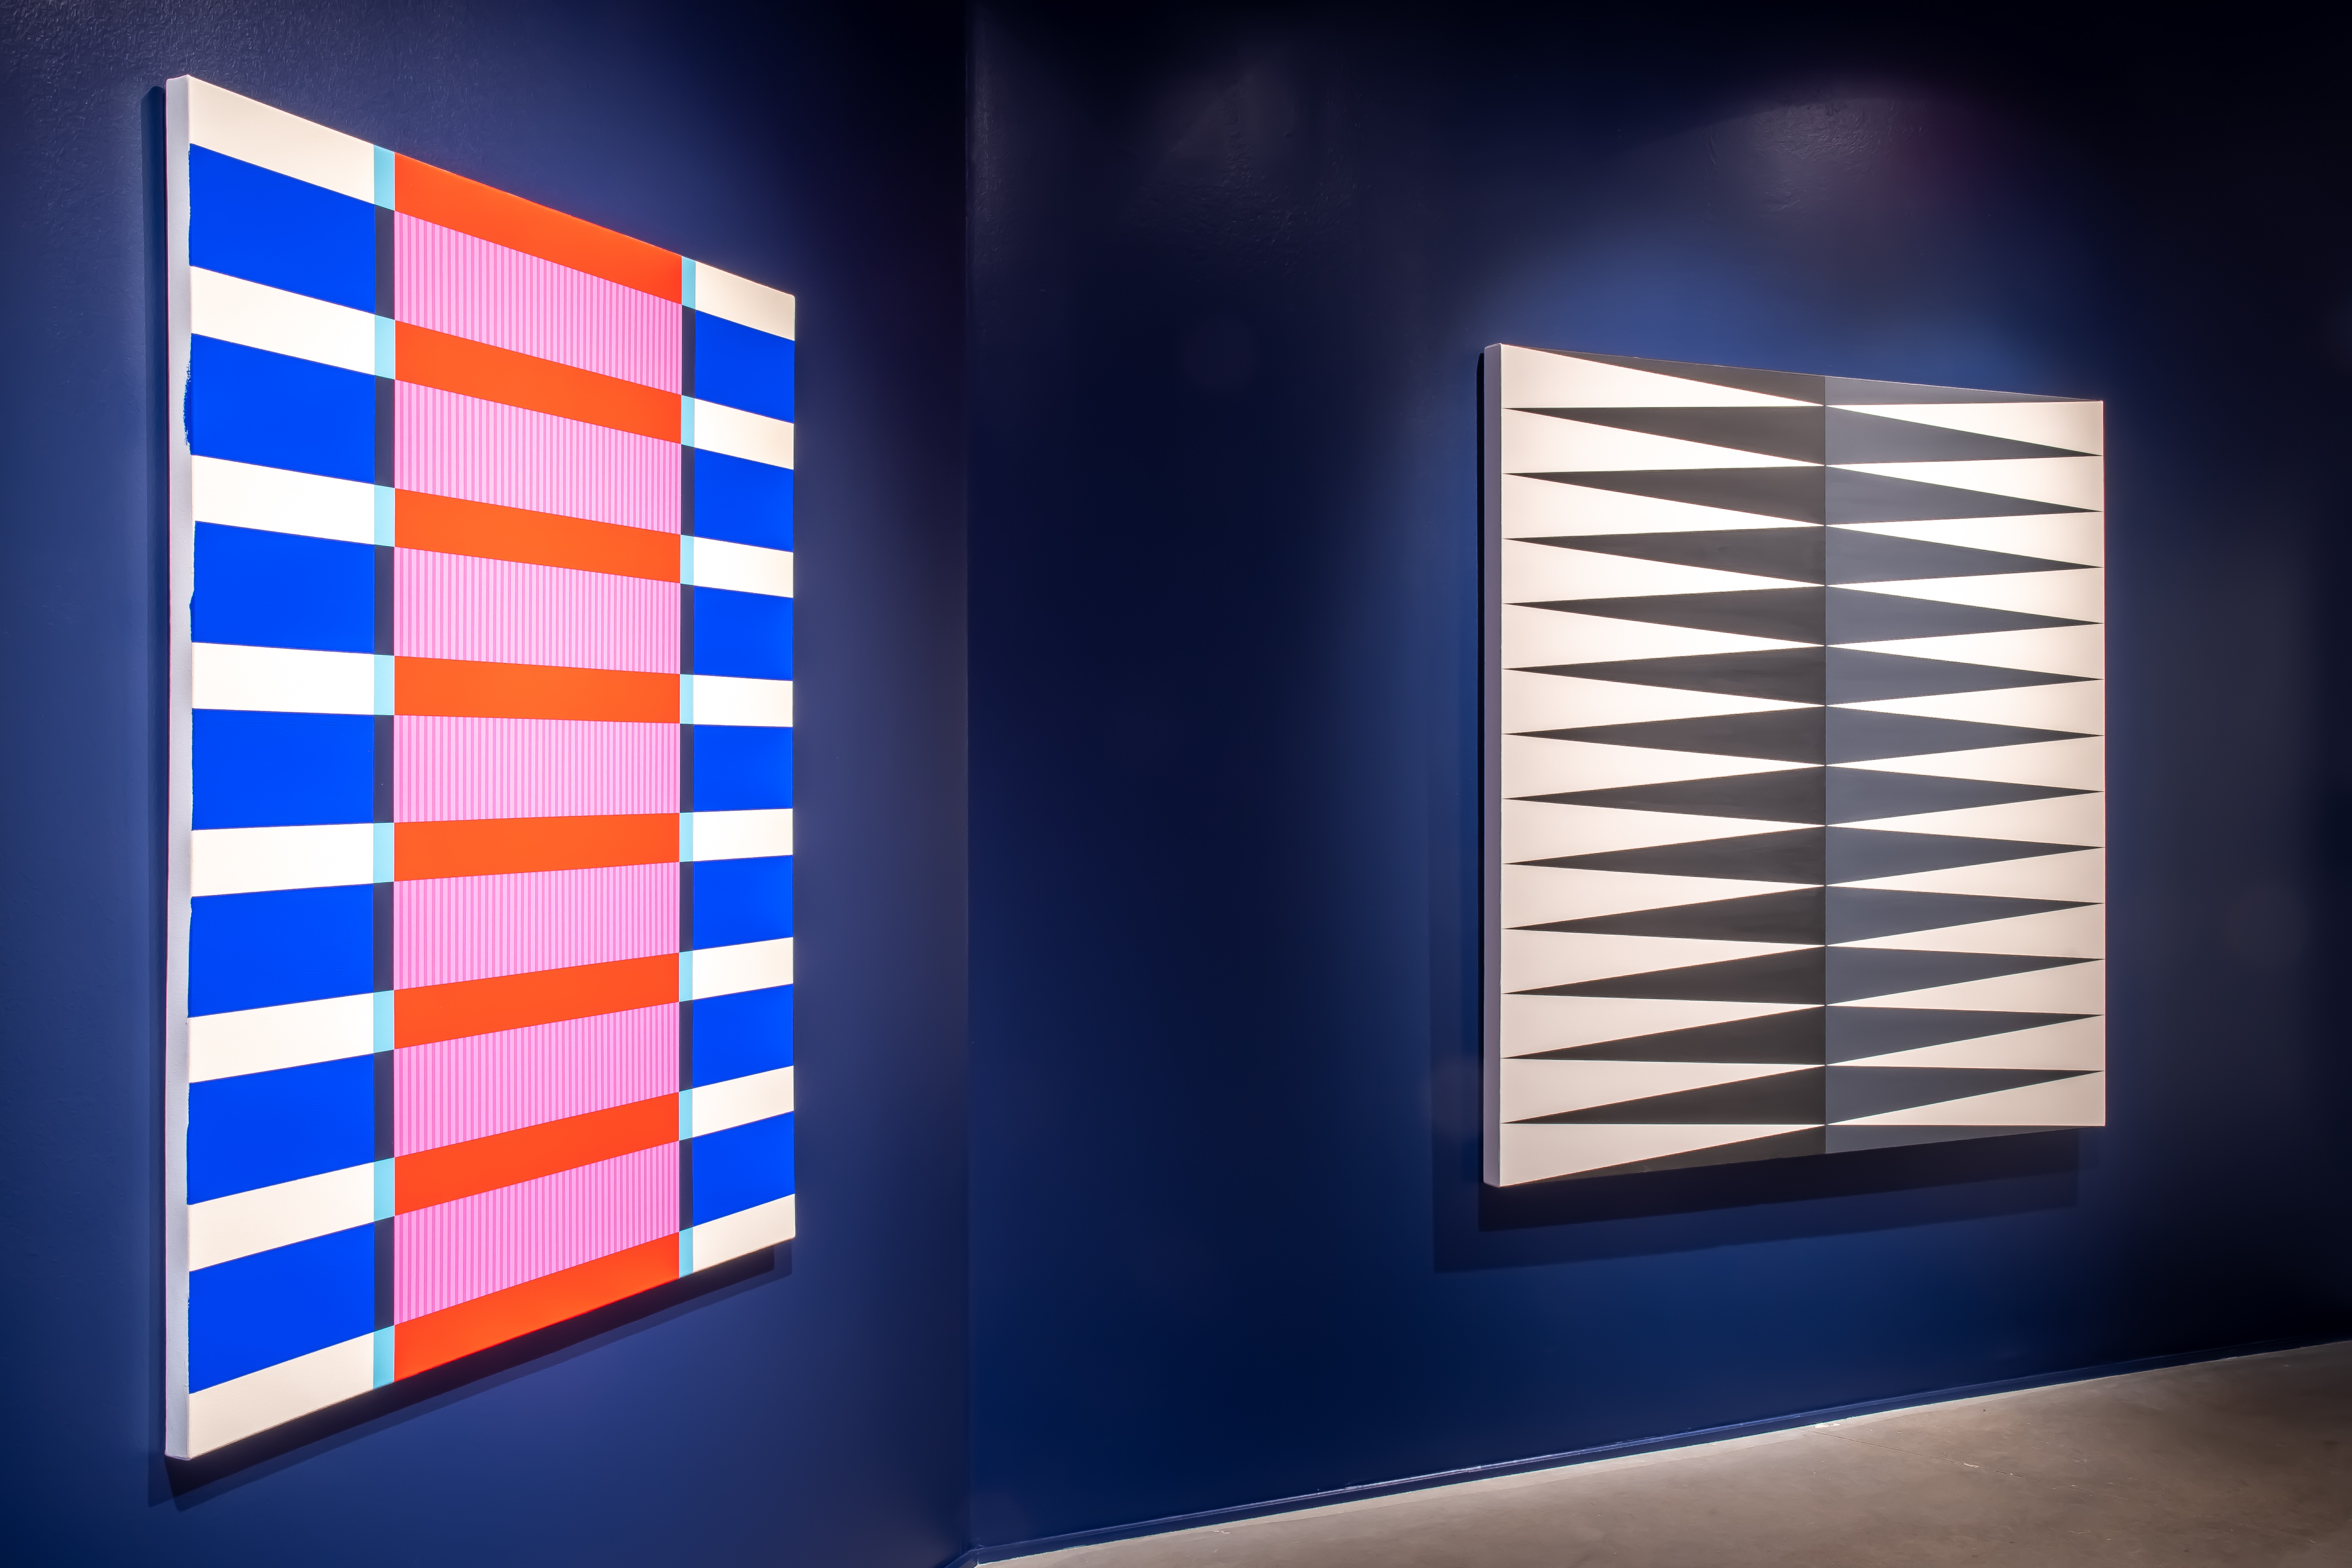 Two large paintings hang on a dark blue wall. On the left: Stark blue, white, red and pink lines create a pattern of three columns with alternating colors. Right: Two shades of gray pointed shapes in two columns create teeth-like imagery on a white canvas